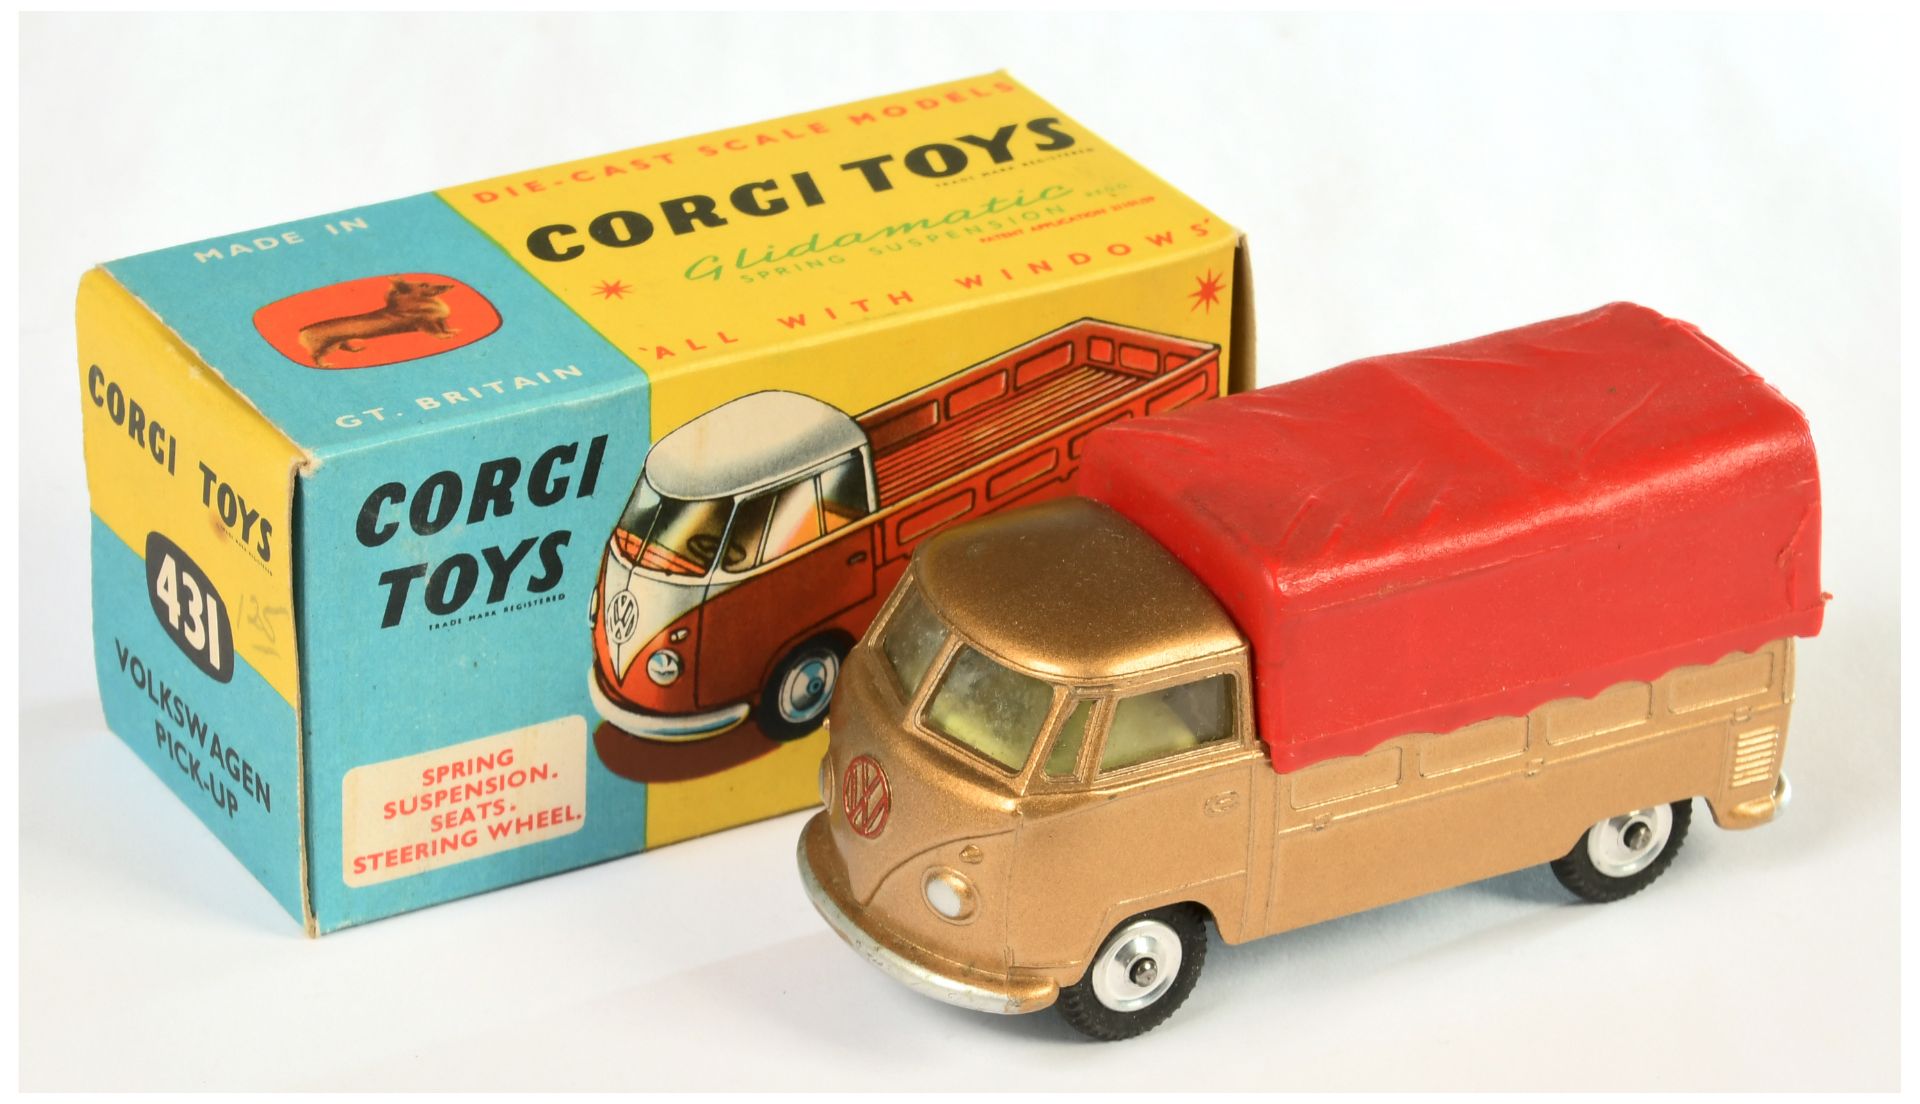 Corgi Toys 431 Volkswagen Pick-Up Truck - RARE GOLD Body with lemon interior and red plastic cano...